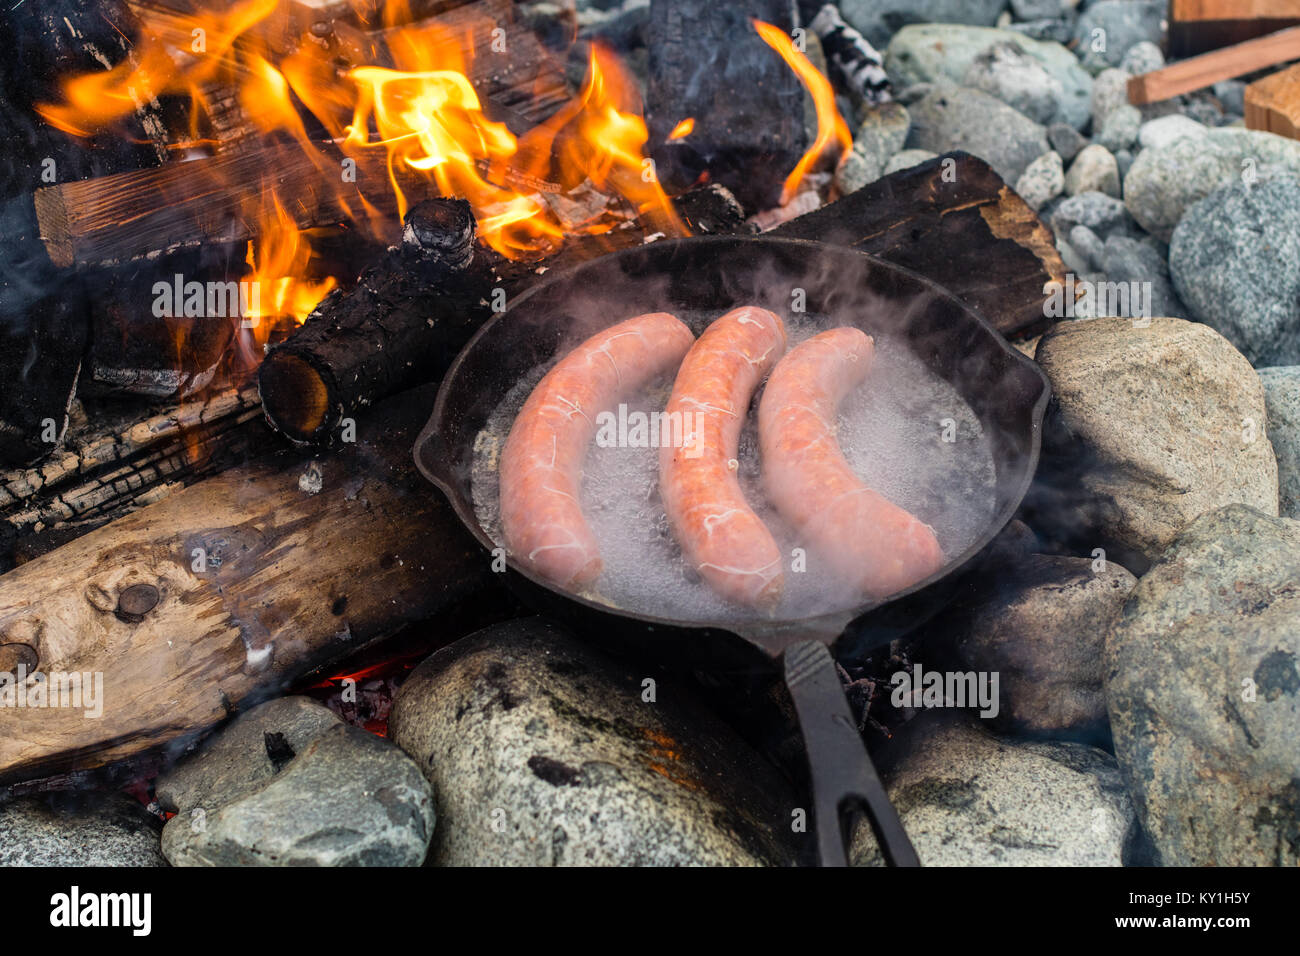 Live Fire Cooking Juicy Sausages Over Campfire Stock Photo Alamy